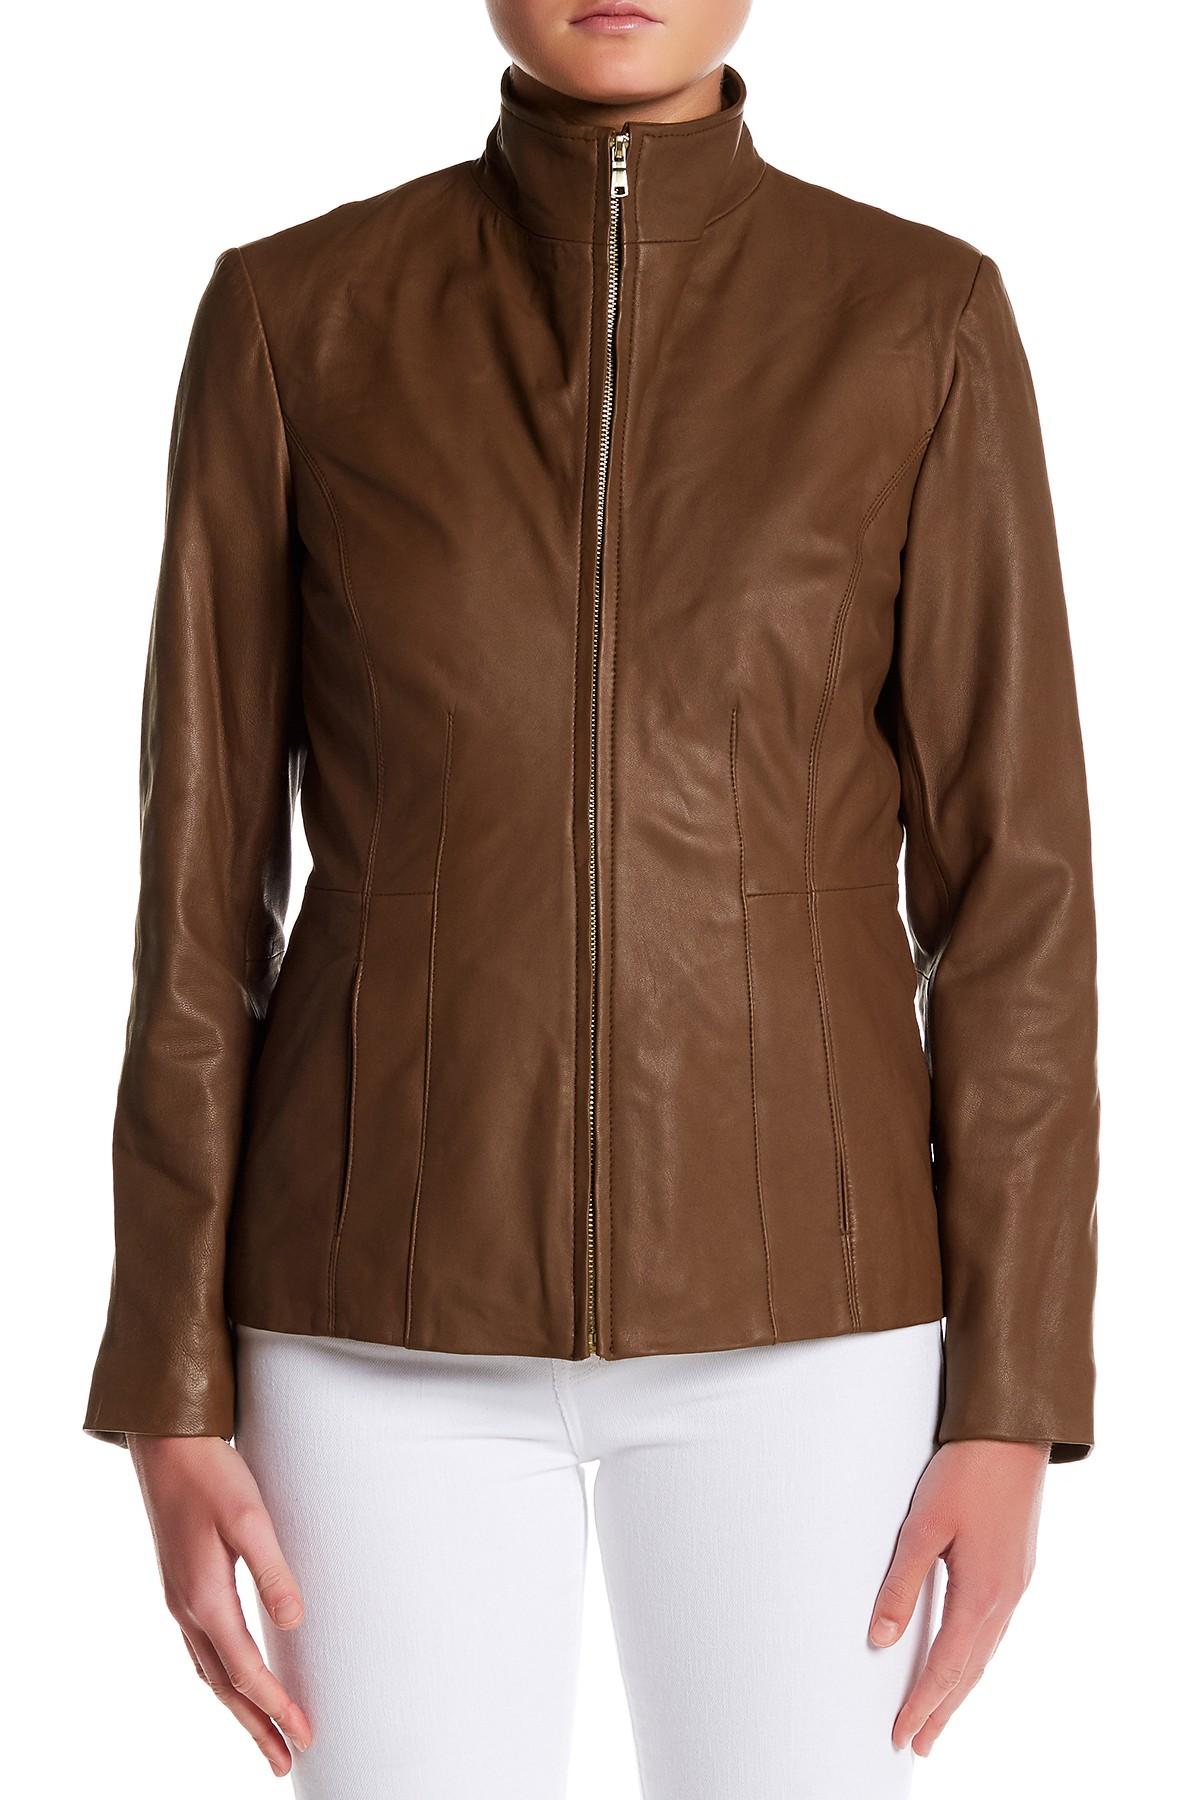 Cole Haan Genuine Leather Front Zip Wing Collar Jacket in Brown - Lyst